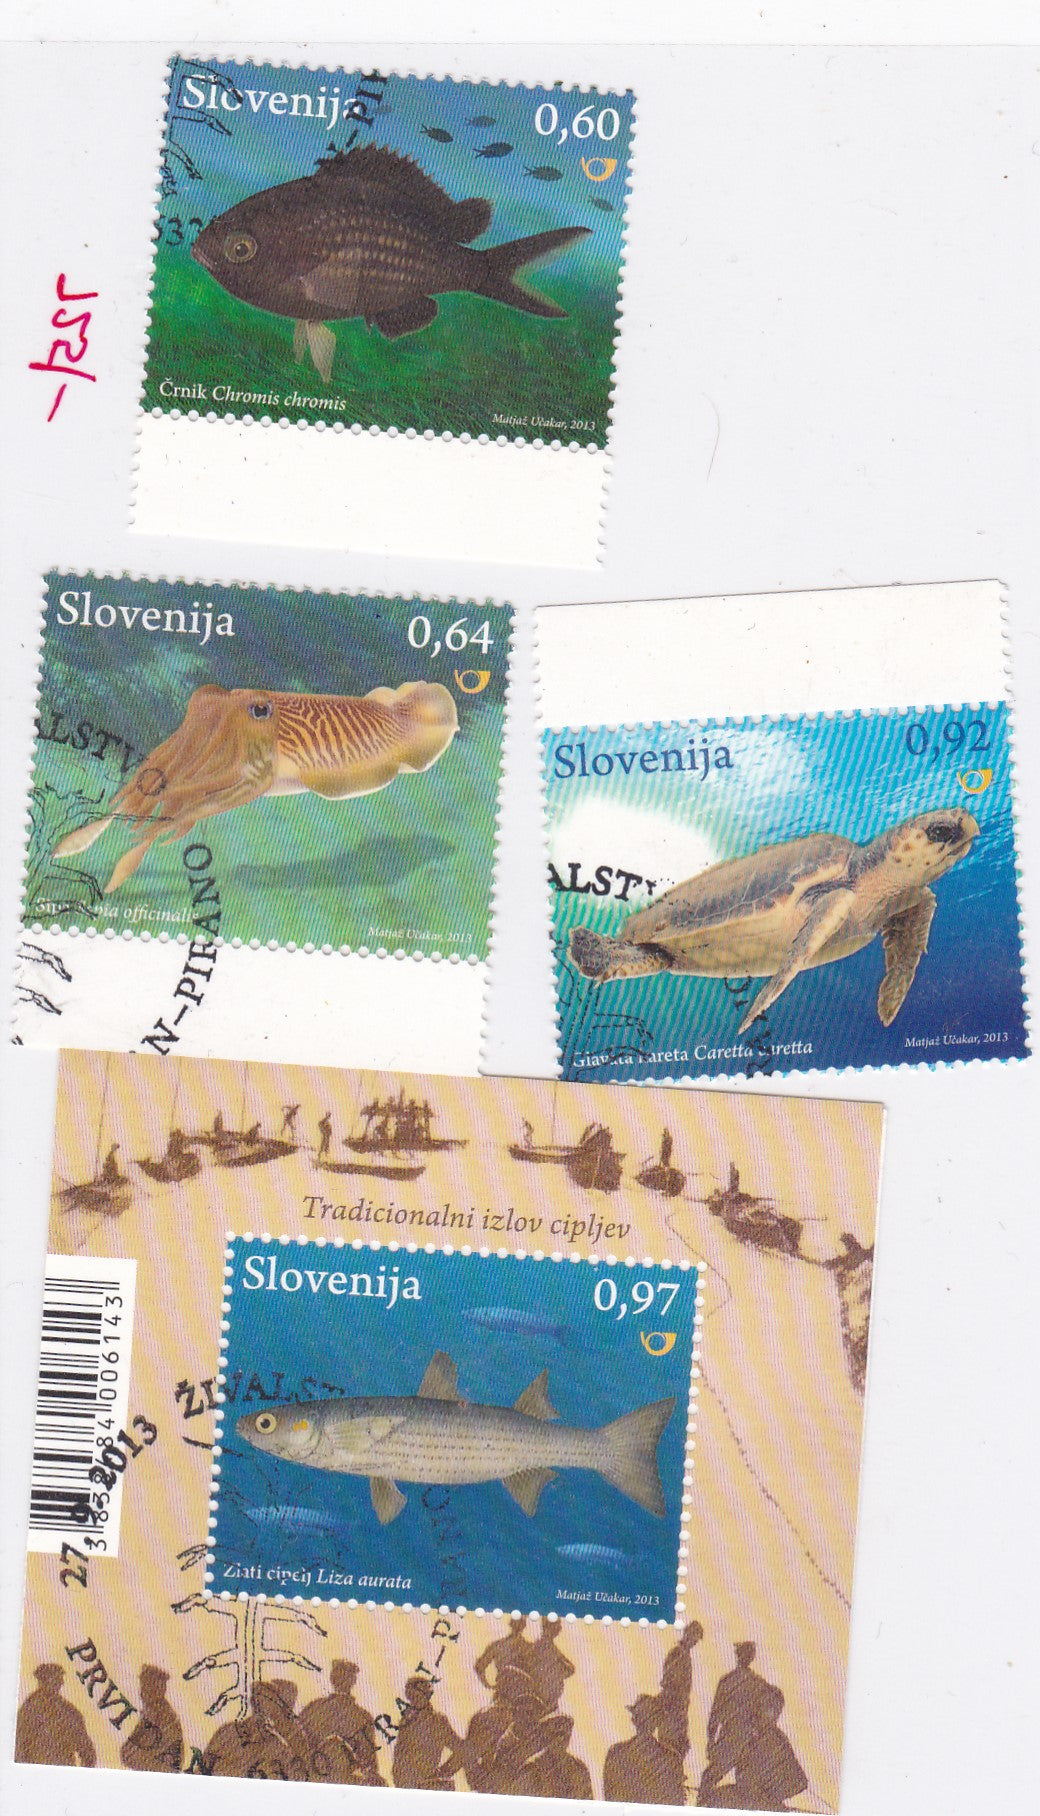 Slovenia set of 4 unusual stamps with sea salt affixed